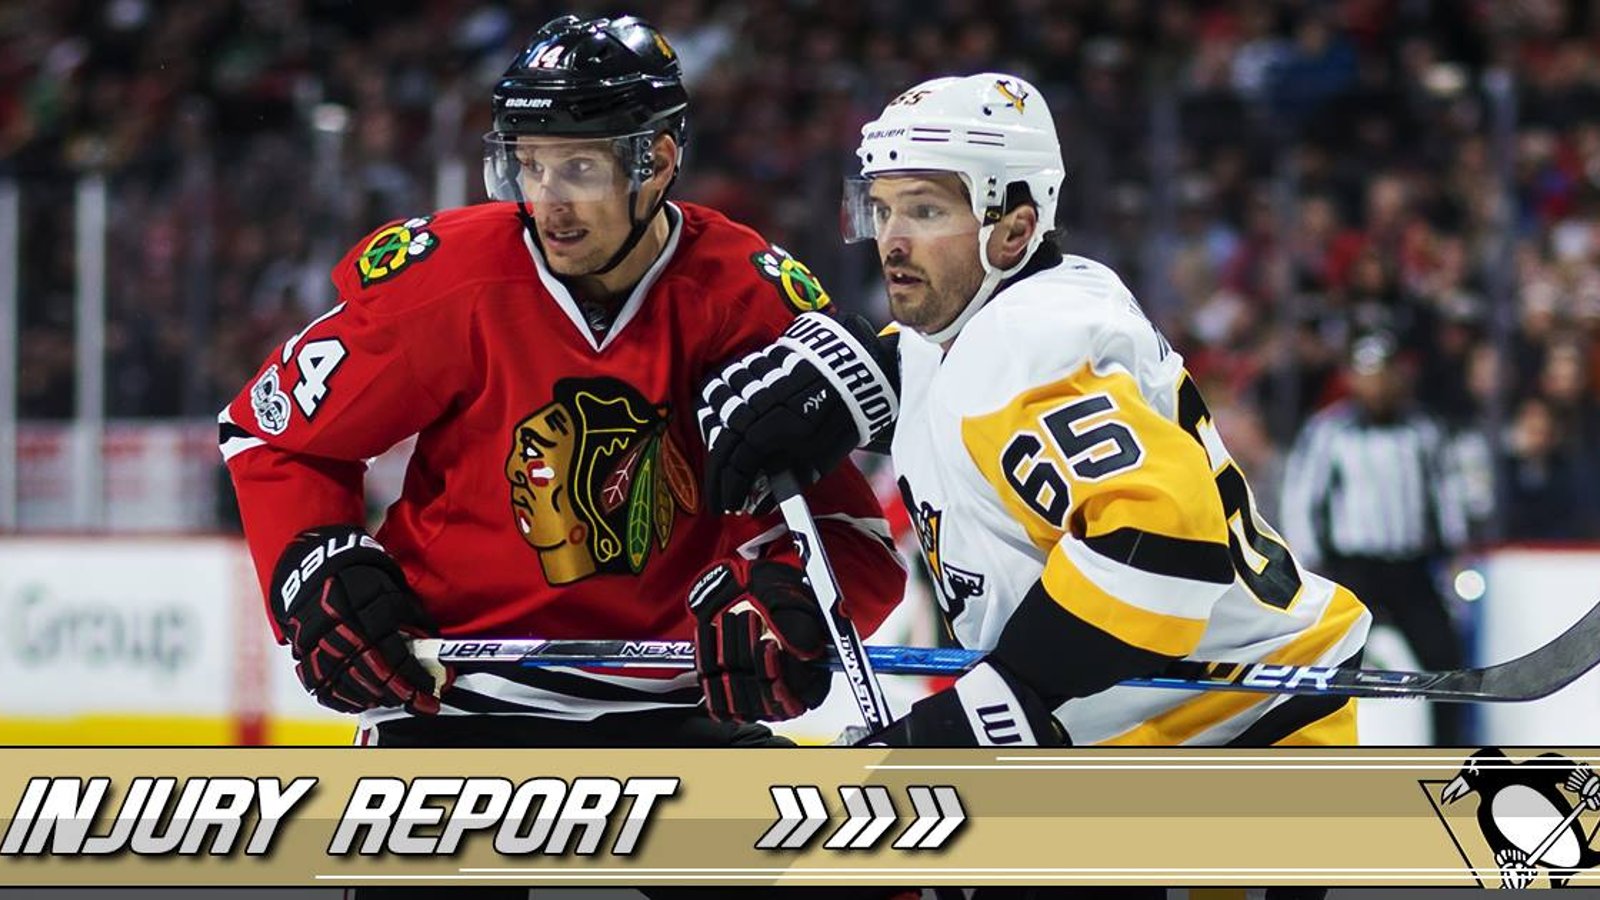 Injury Report: The Pitsburgh Penguins loses another player.